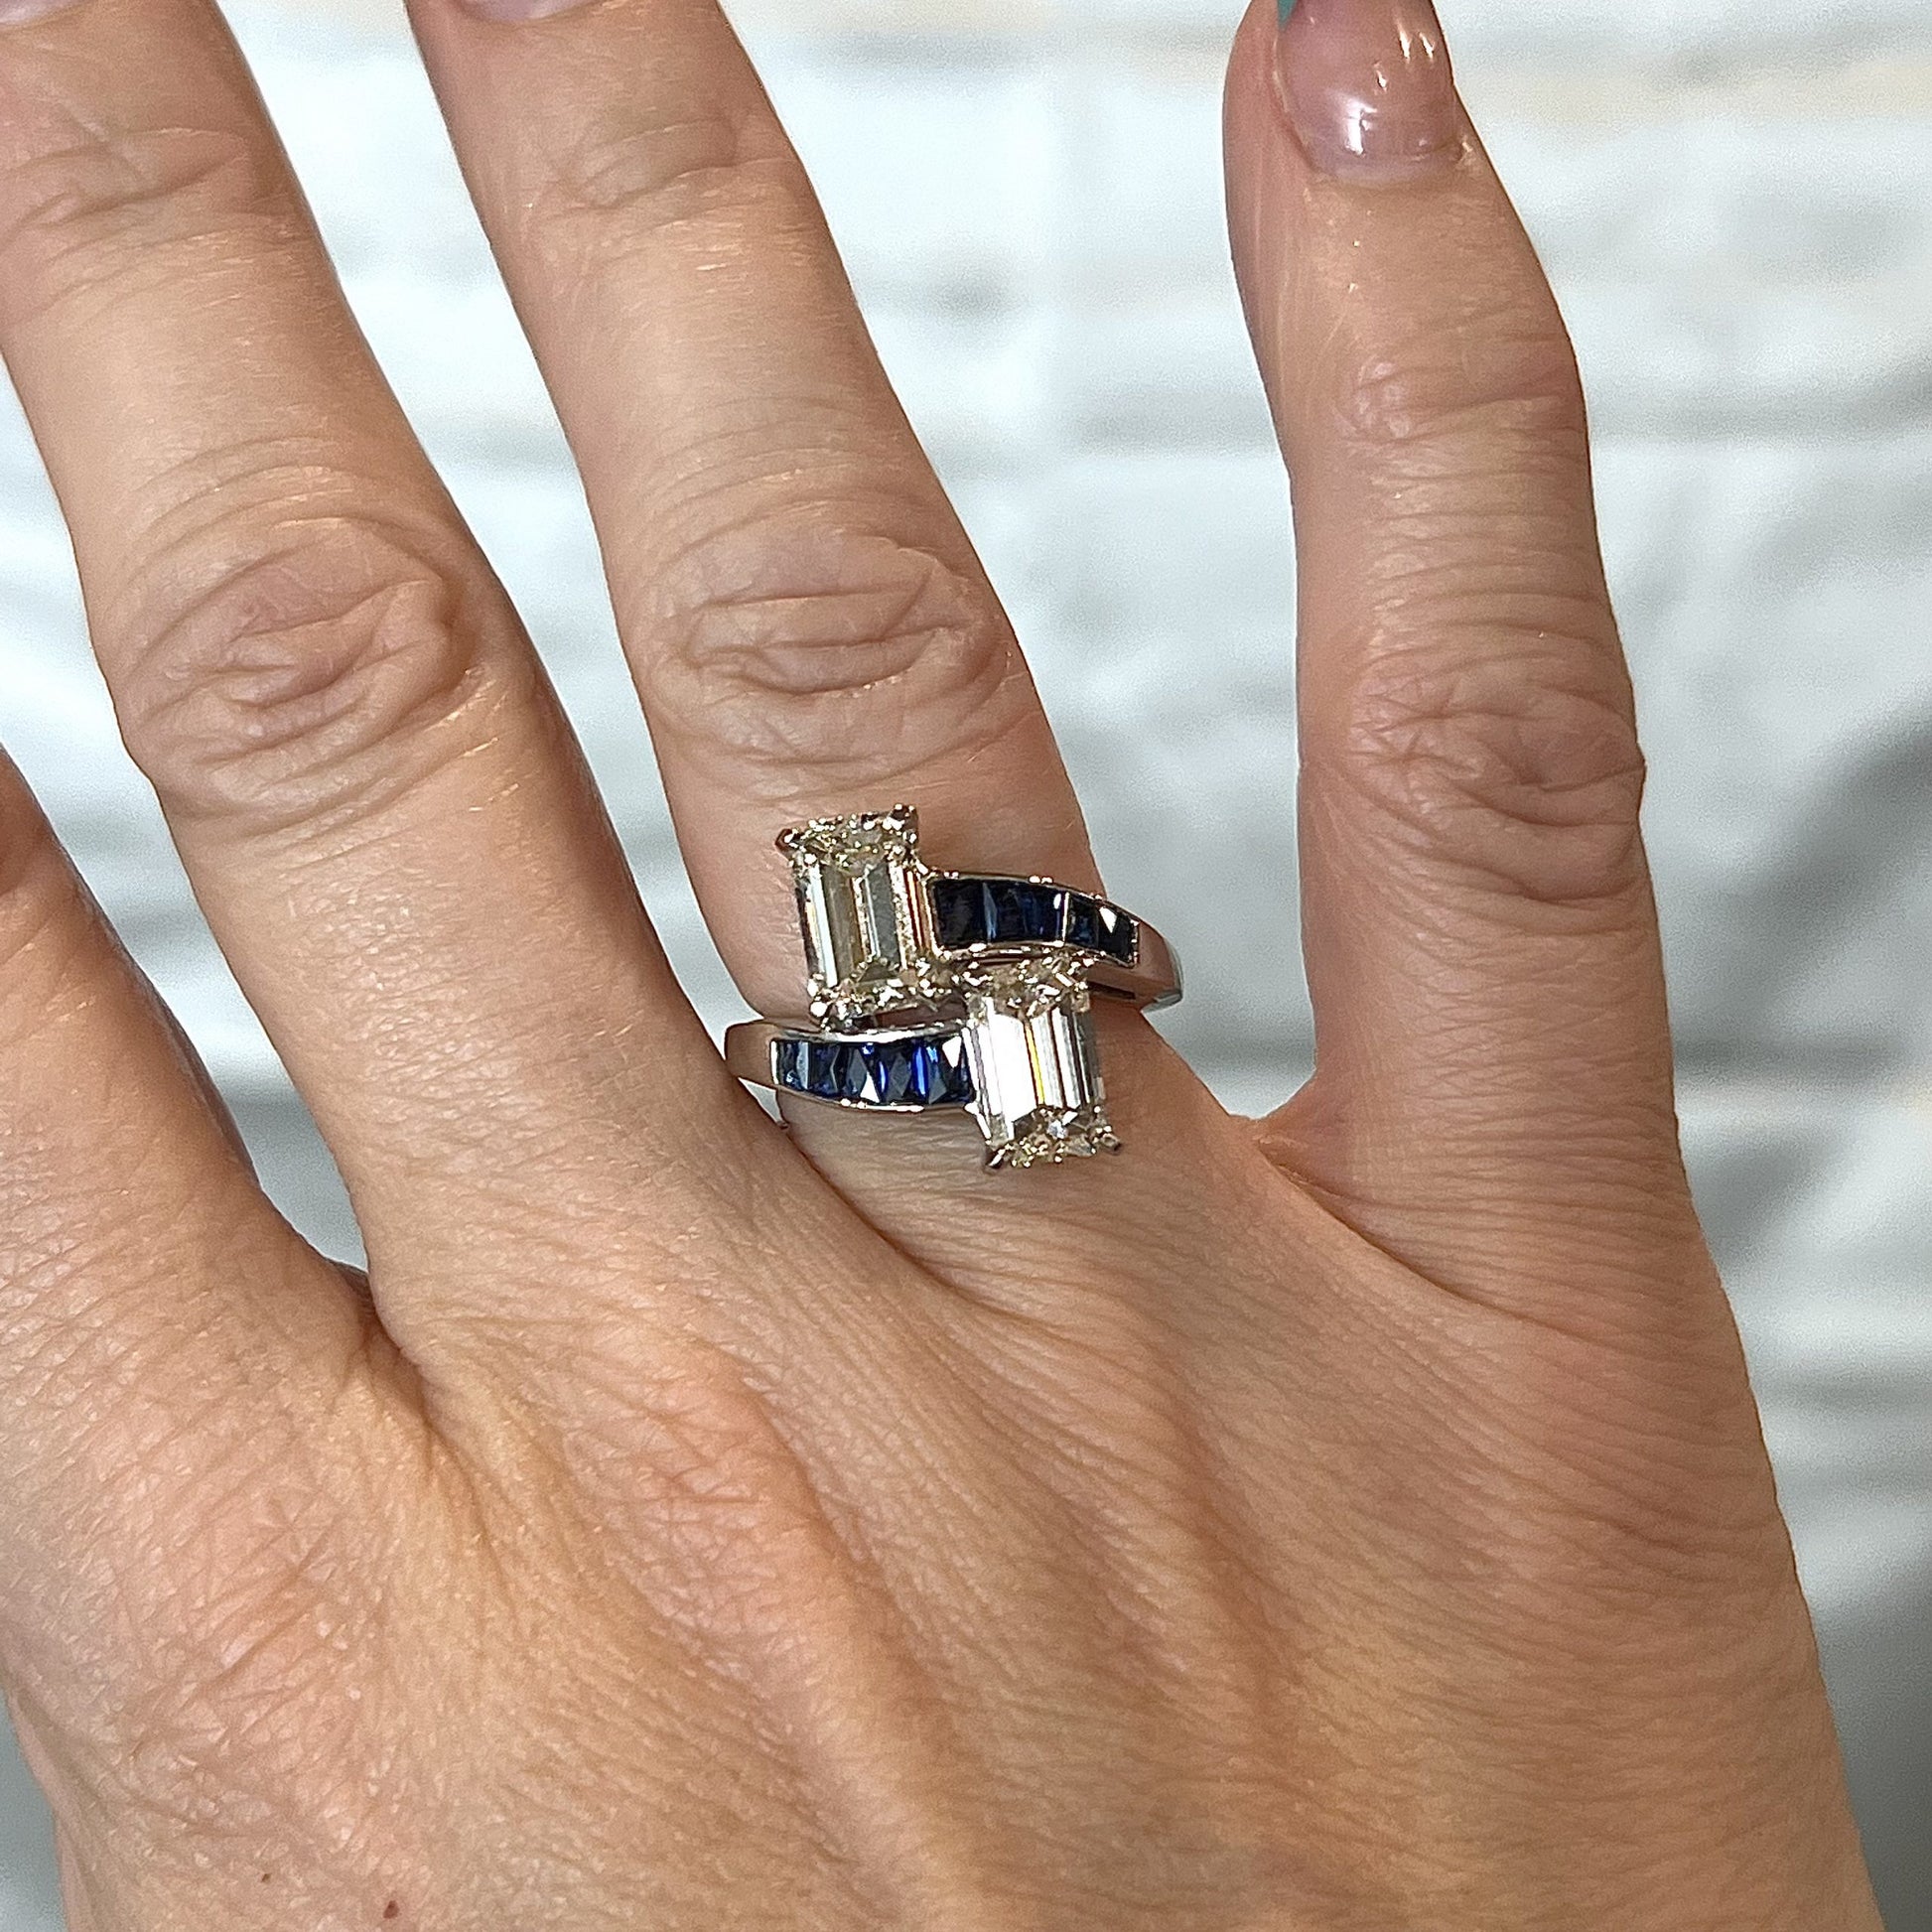 Diamond & Sapphire Bypass Engagement Ring in PlatinumComposition: PlatinumRing Size: 5.75Total Diamond Weight: 3.00 ctTotal Gram Weight: 8.0 g